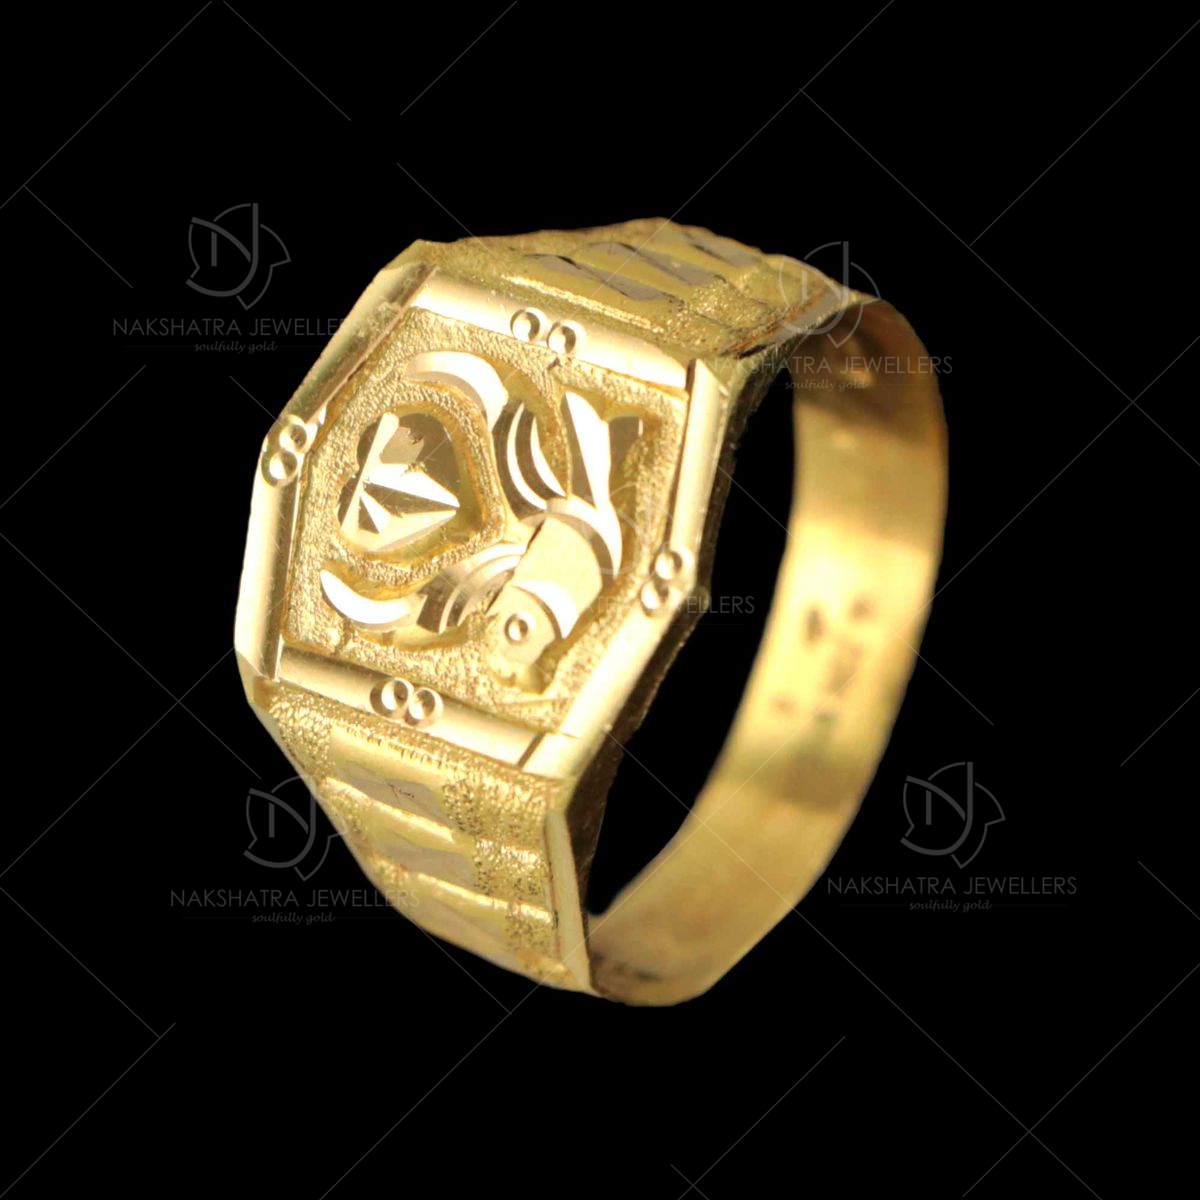 10 Gram 14kt Two Toned Gold Ring With Diamonds | Property Room